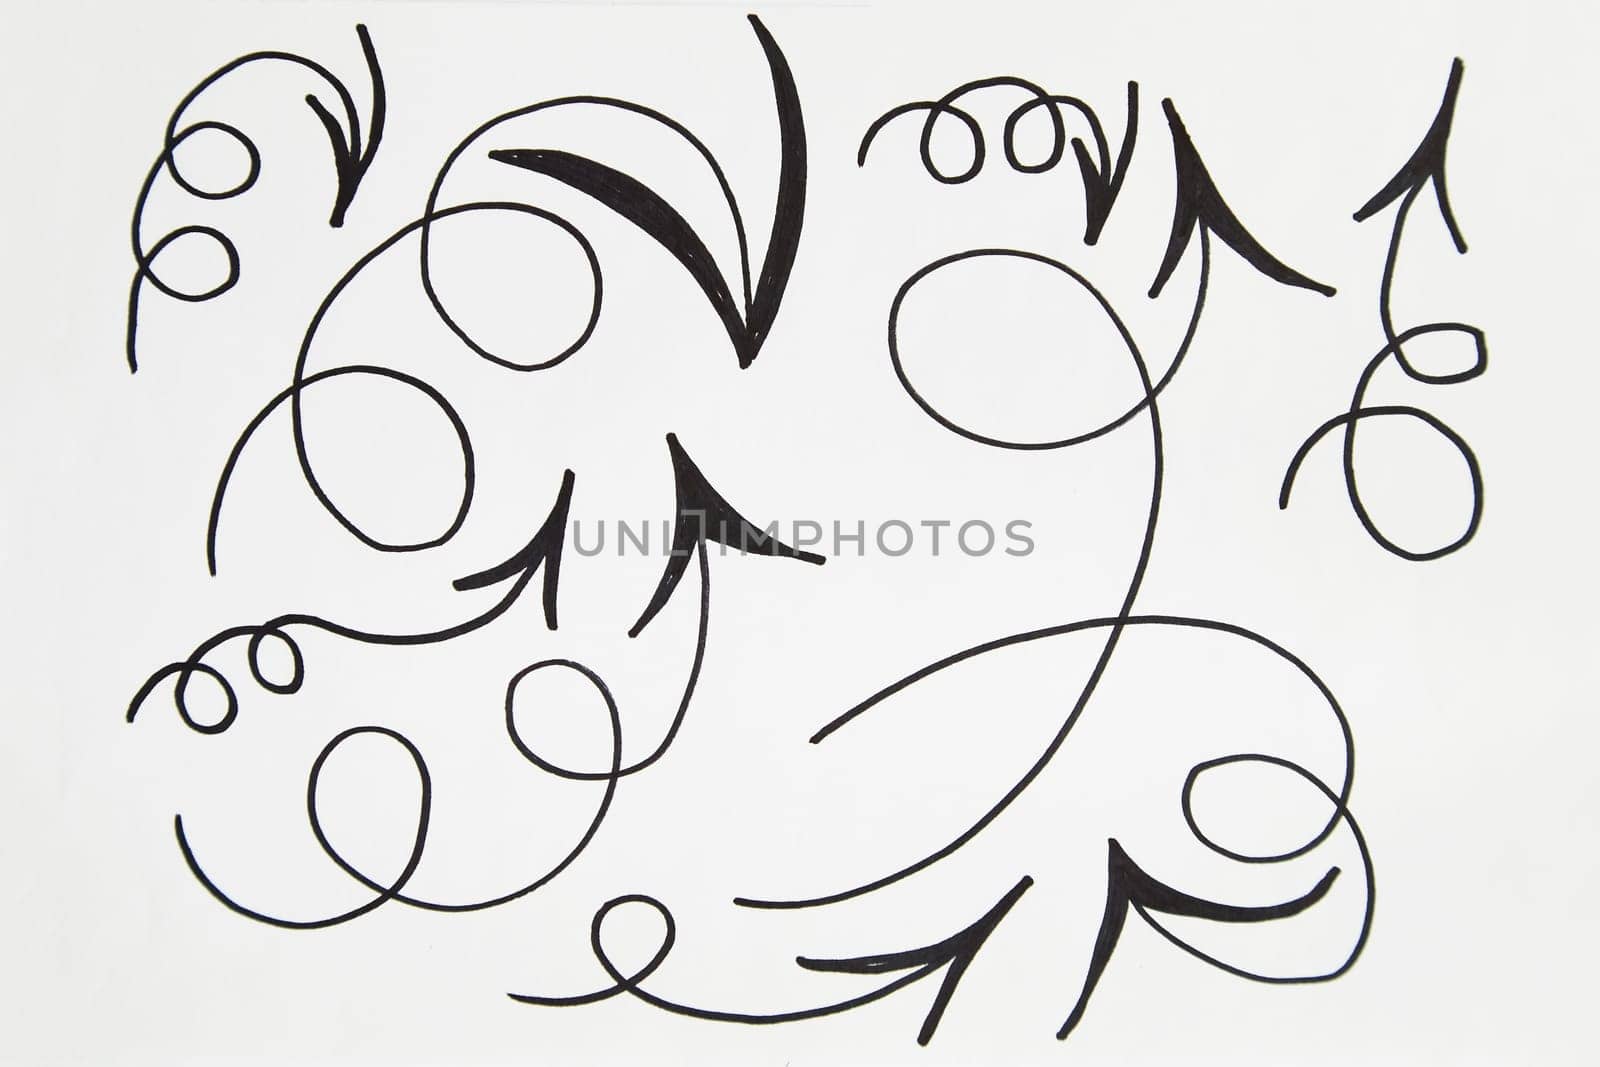 Modern abstract art set of arrows on white background. Hand Drawing of arrows in an artistic style by keleny